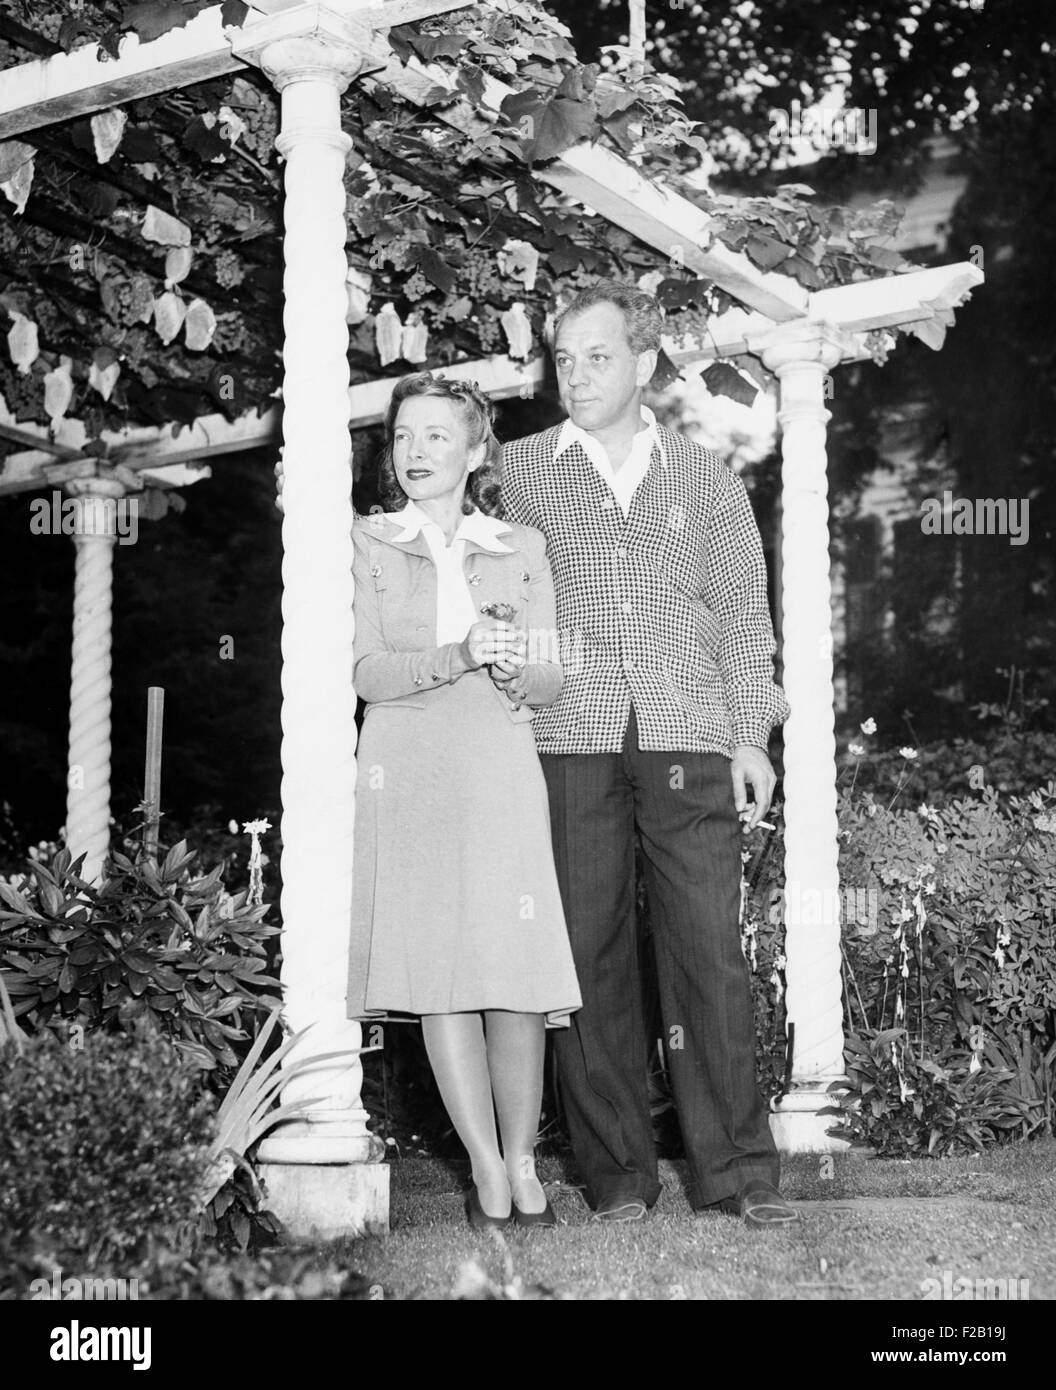 Helen Hayes and her husband Charles McArthur, ca. Sept. 1940. MacArthur was portrayed by the actor Matthew Broderick in the 1994 film MRS. PARKER AND THE VICIOUS CIRCLE. (CSU 2015 7 454) Stock Photo